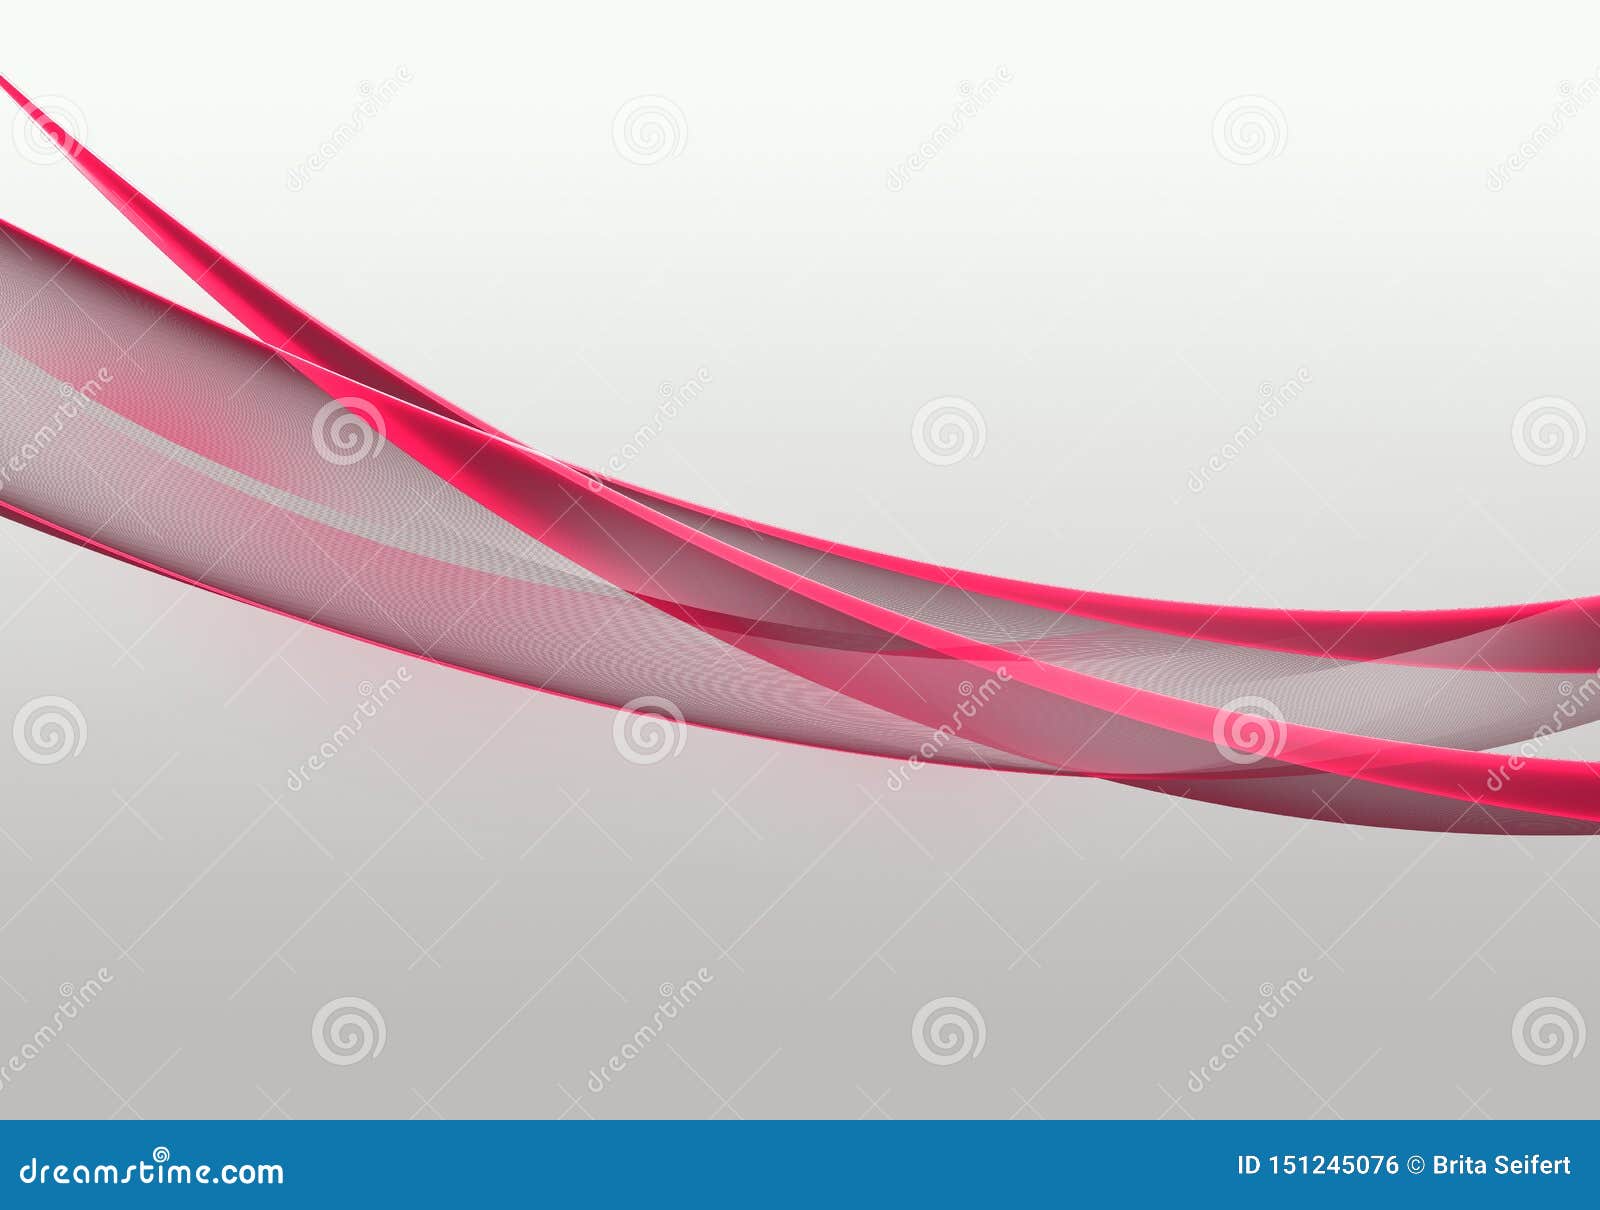 Abstract Bright Background with Red and Black Dynamic Lines for Wallpaper,  Business Card or Template Stock Photo - Image of flow, creative: 151245076